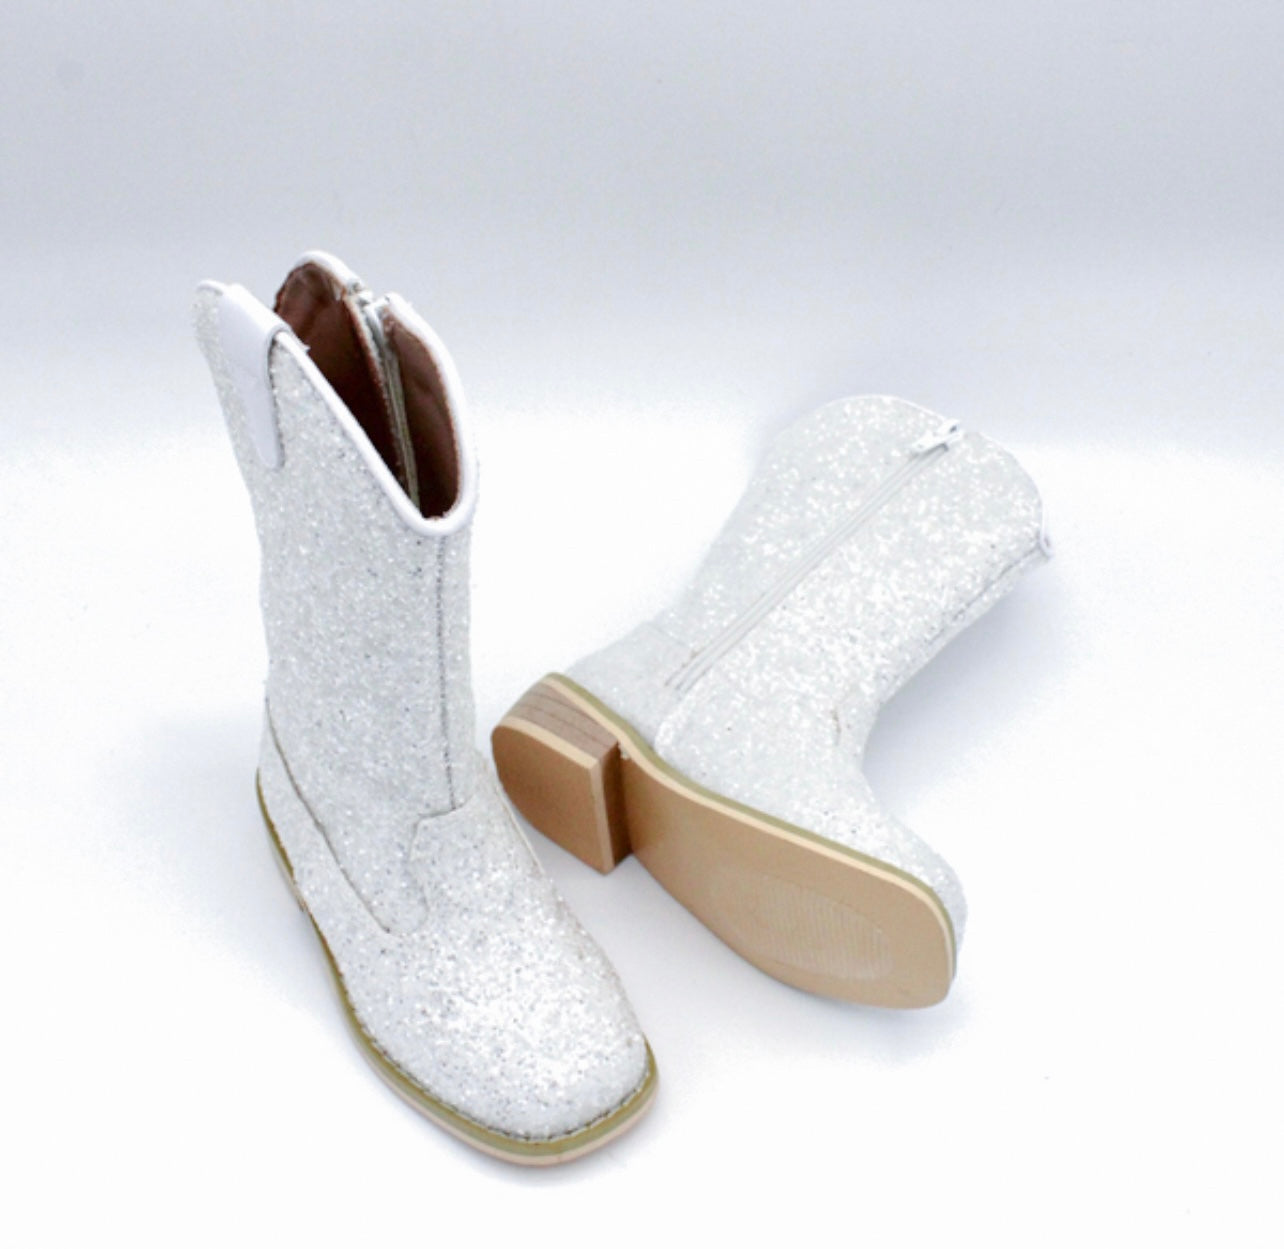 Lil’ Western Cowboy Cowgirl Boots White Glitter ❣️We recommend to size up! ❣️